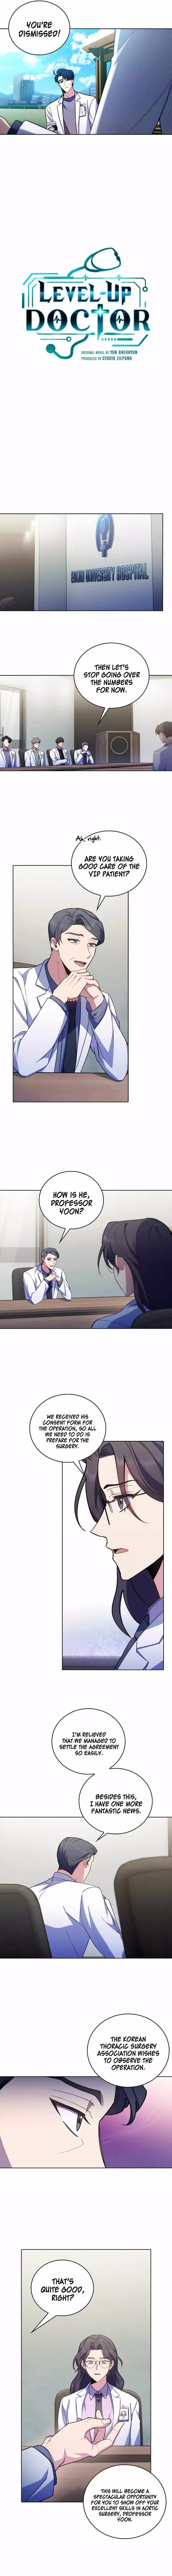 Level-Up Doctor (Manhwa) - 60 page 4-8de9bf9f